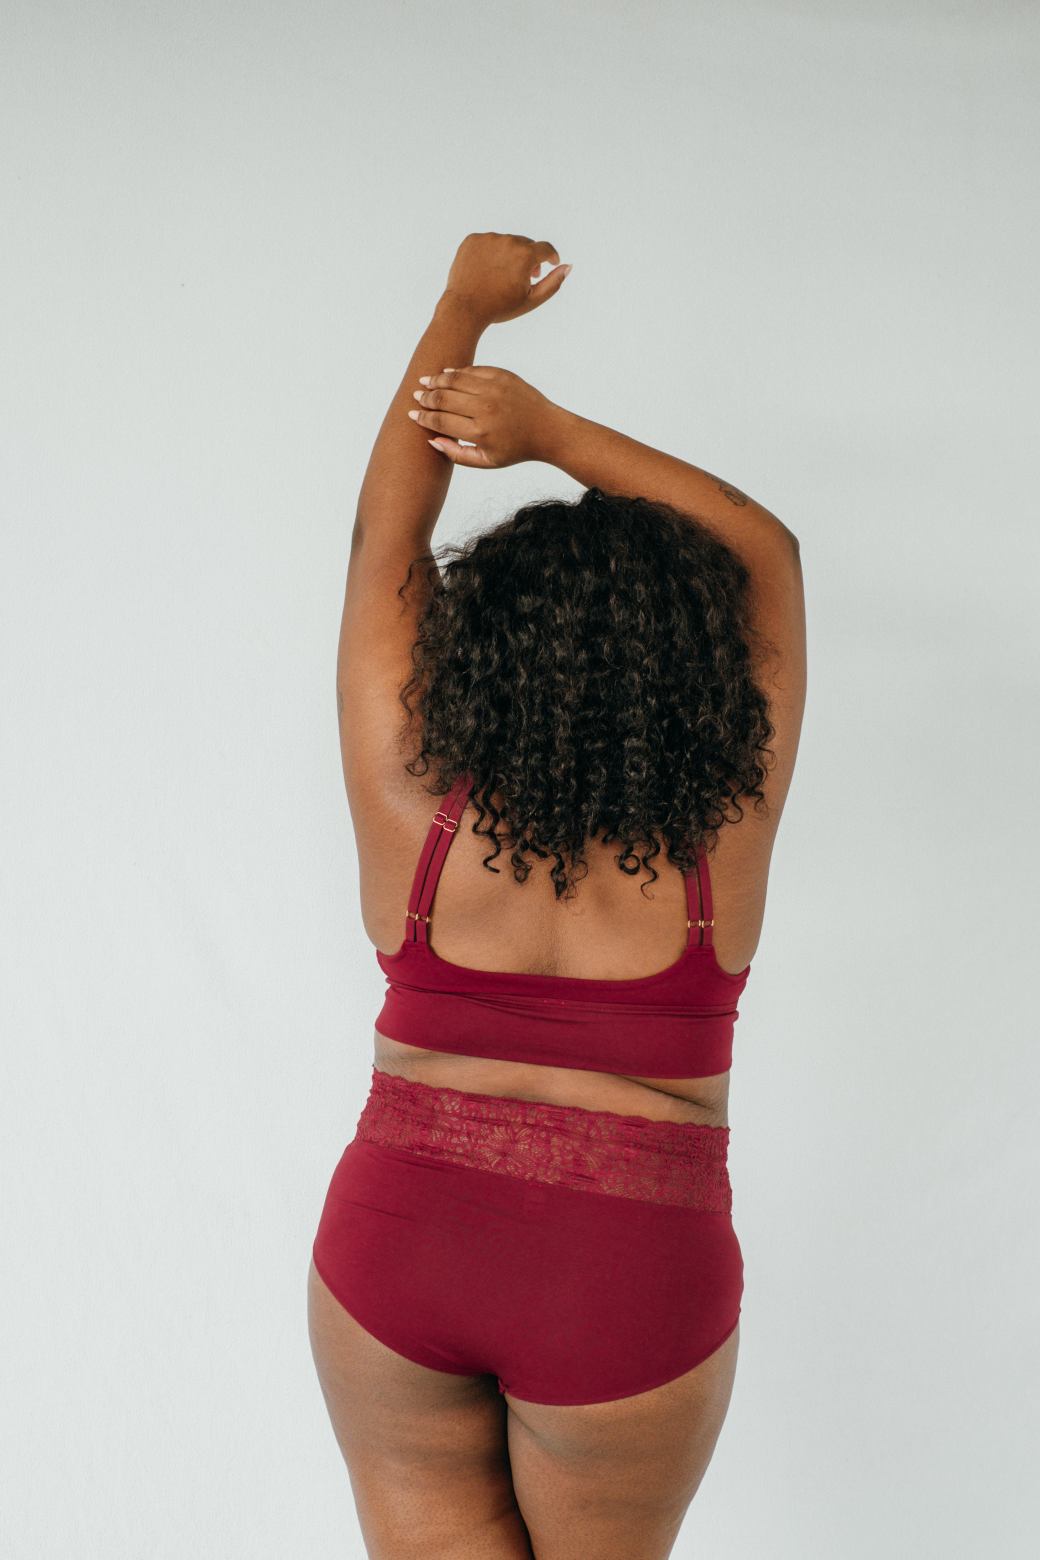 Bralette and High Waist slip Nelly made of sustainable lace and Tencel in dark red.